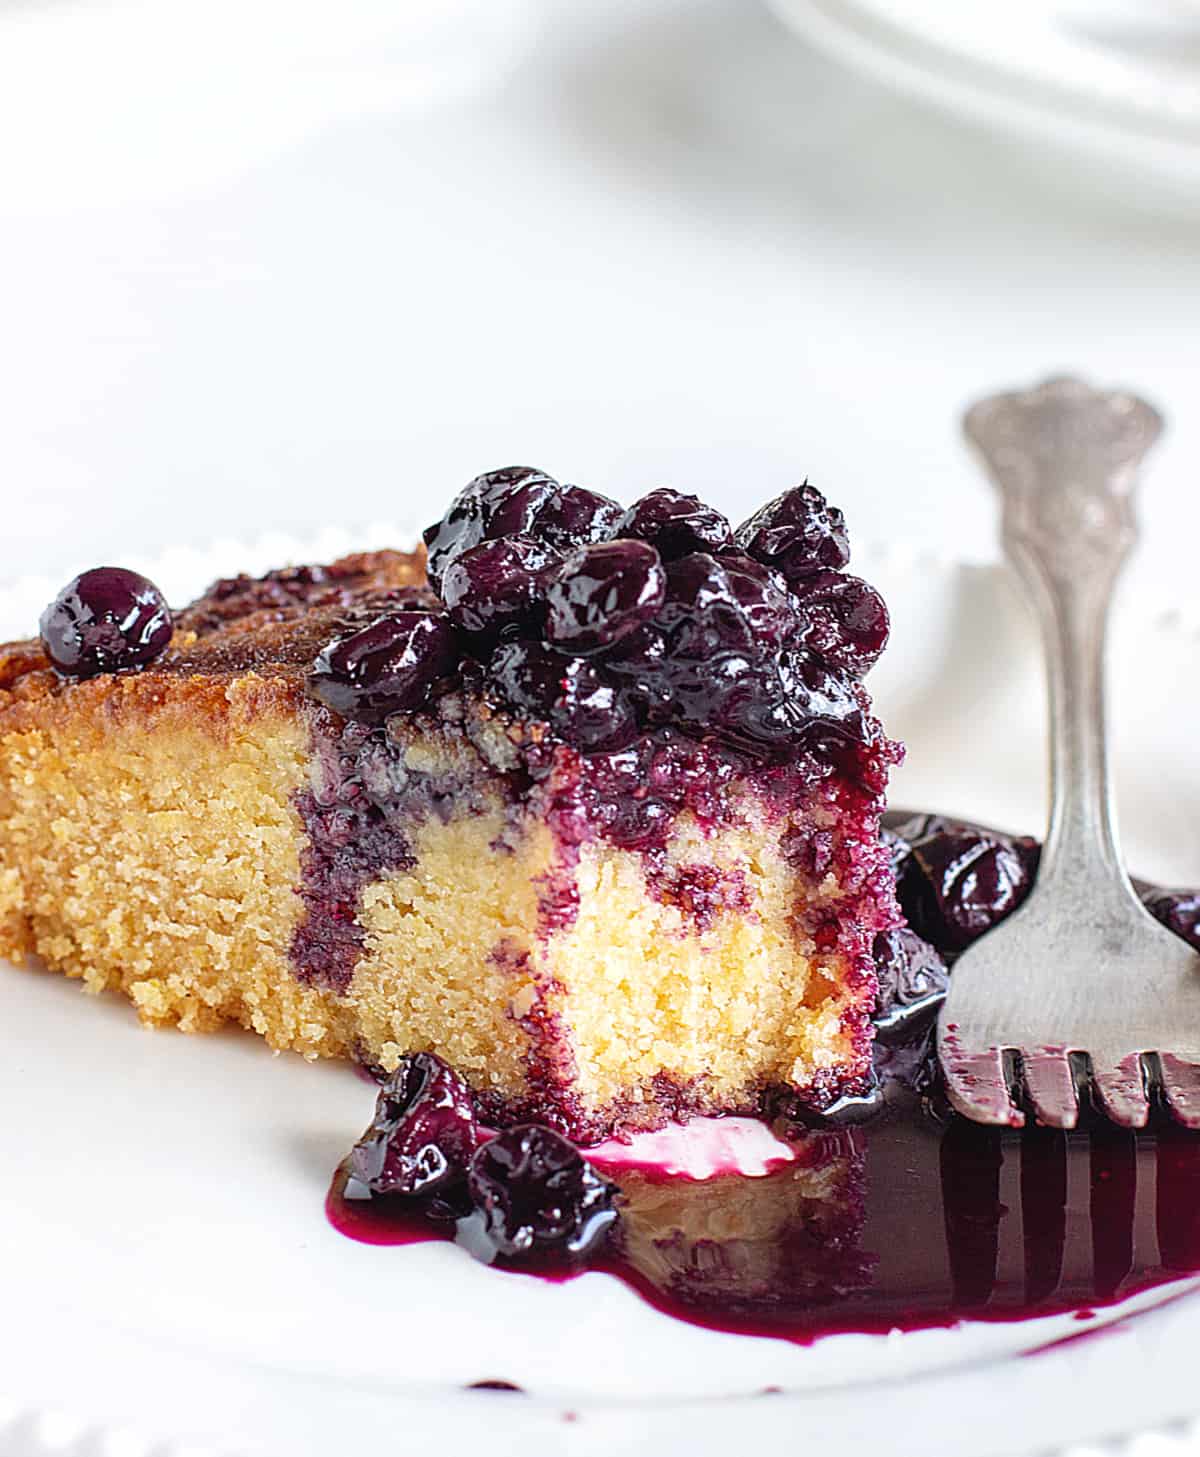 Eaten slice of polenta cake with pool of blueberry sauce, white plate, silver fork.